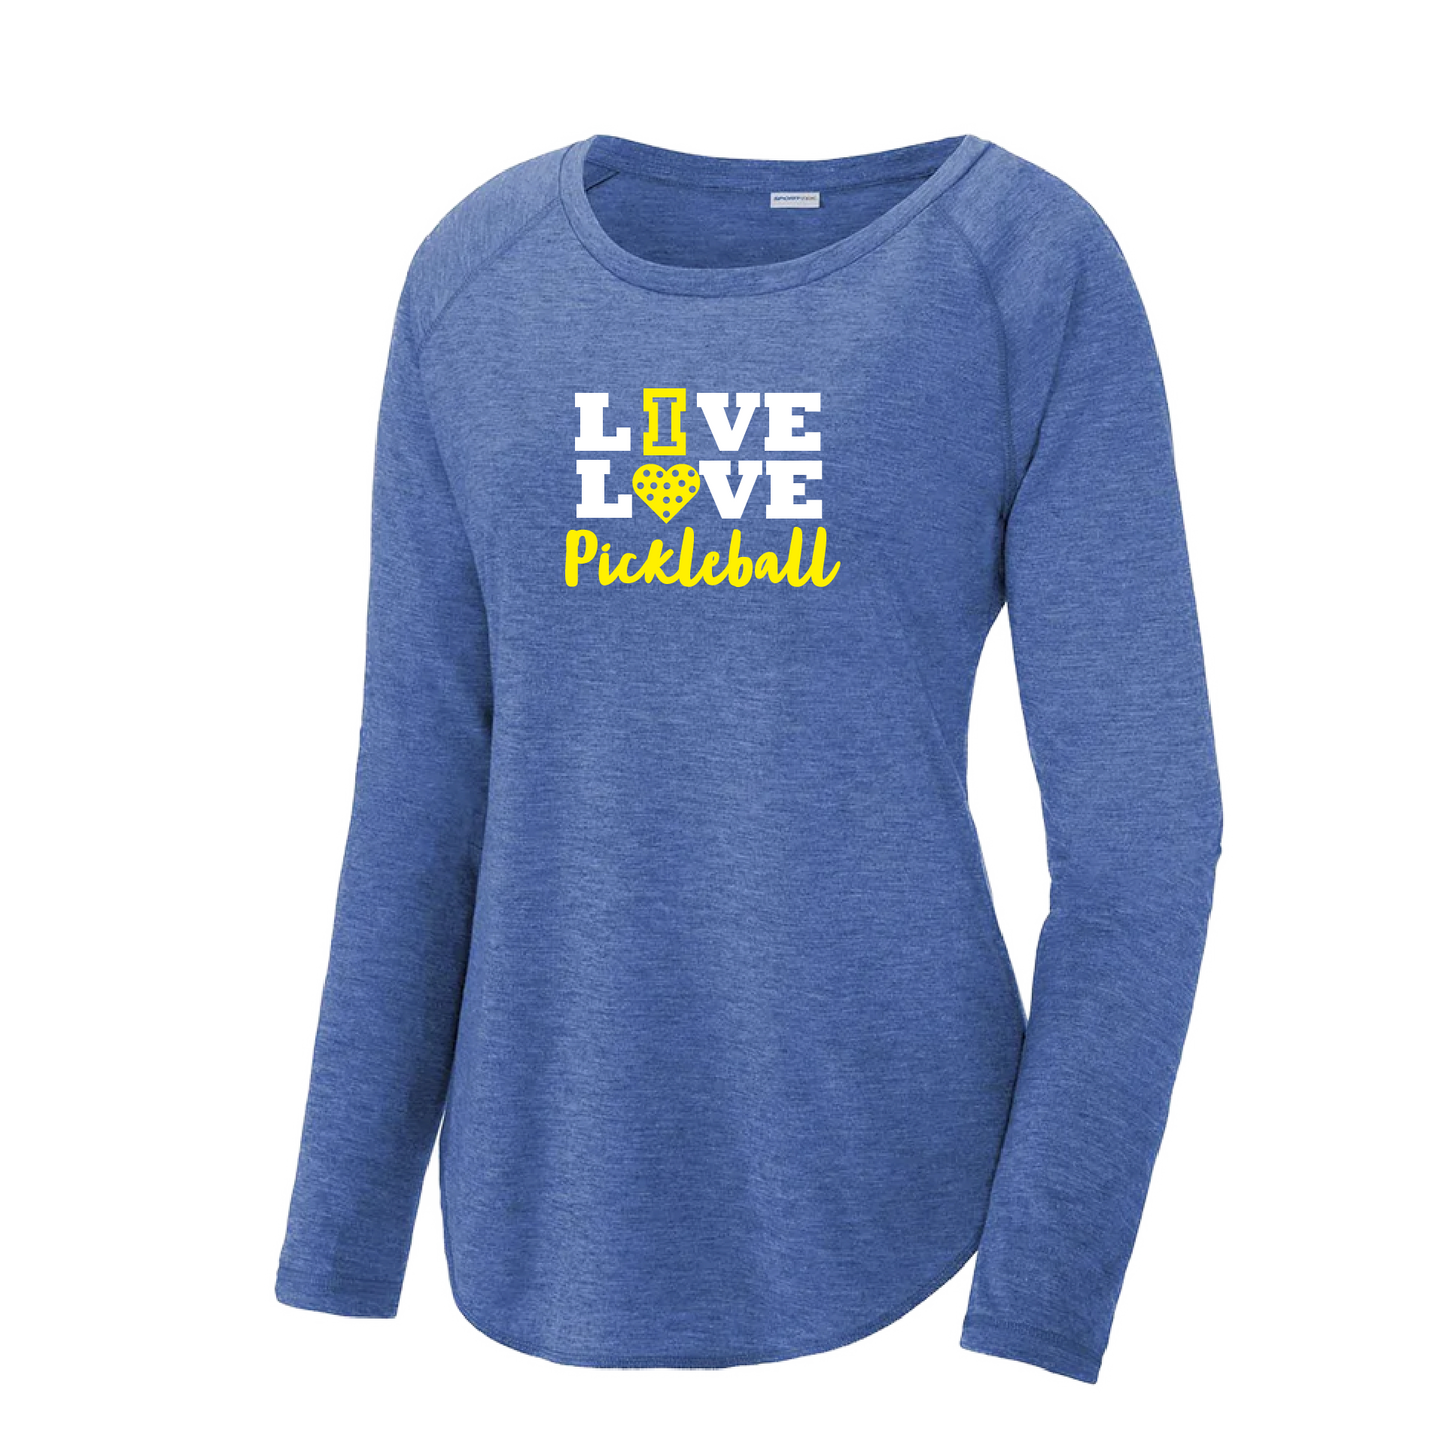 Live Love Pickleball | Women's Long Sleeve Scoop Neck Pickleball Shirts | 75/13/12 poly/cotton/rayon